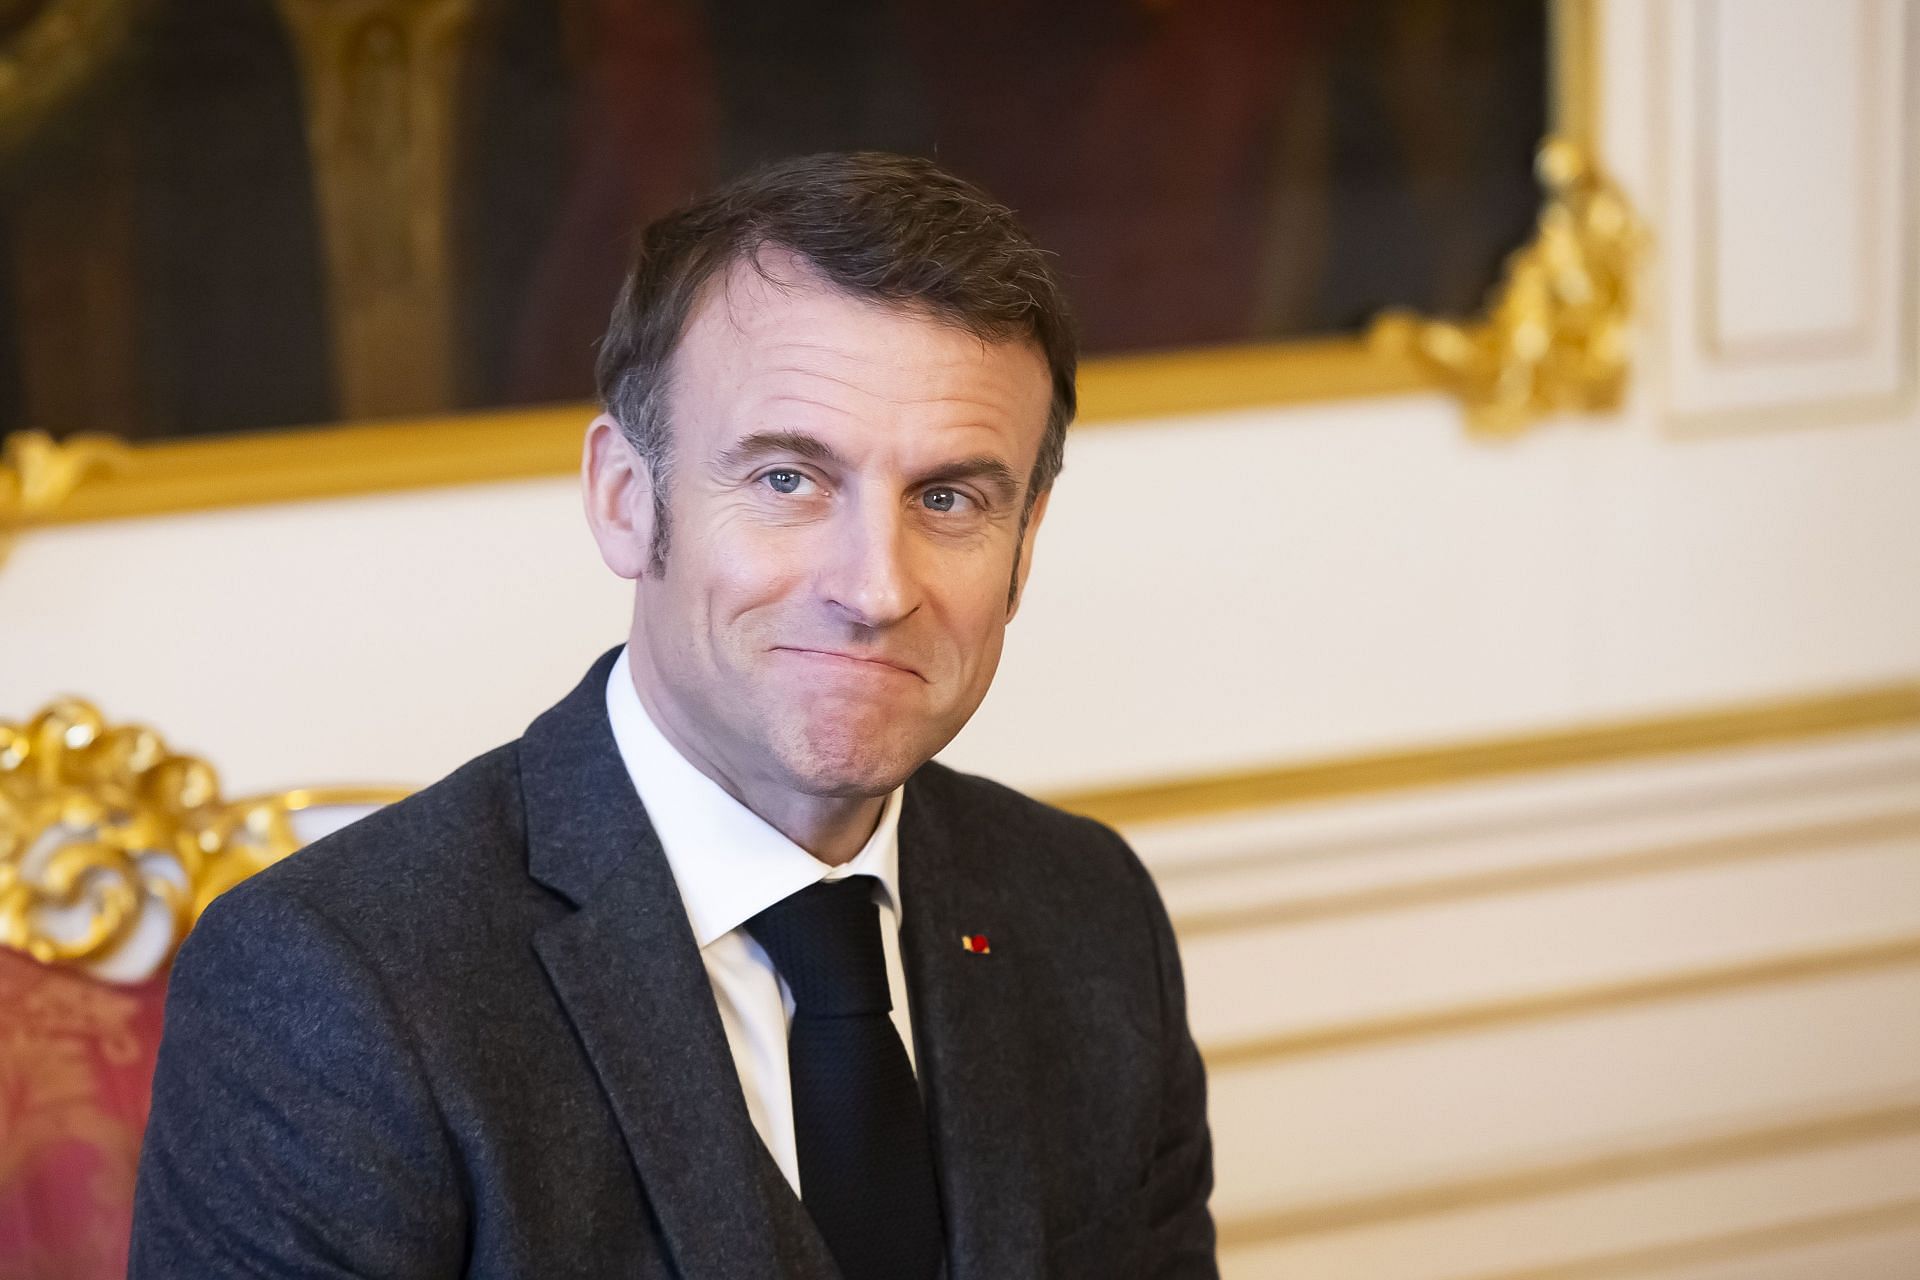 President Macron Meets With Czech Republic Leaders Over Arms To Ukraine